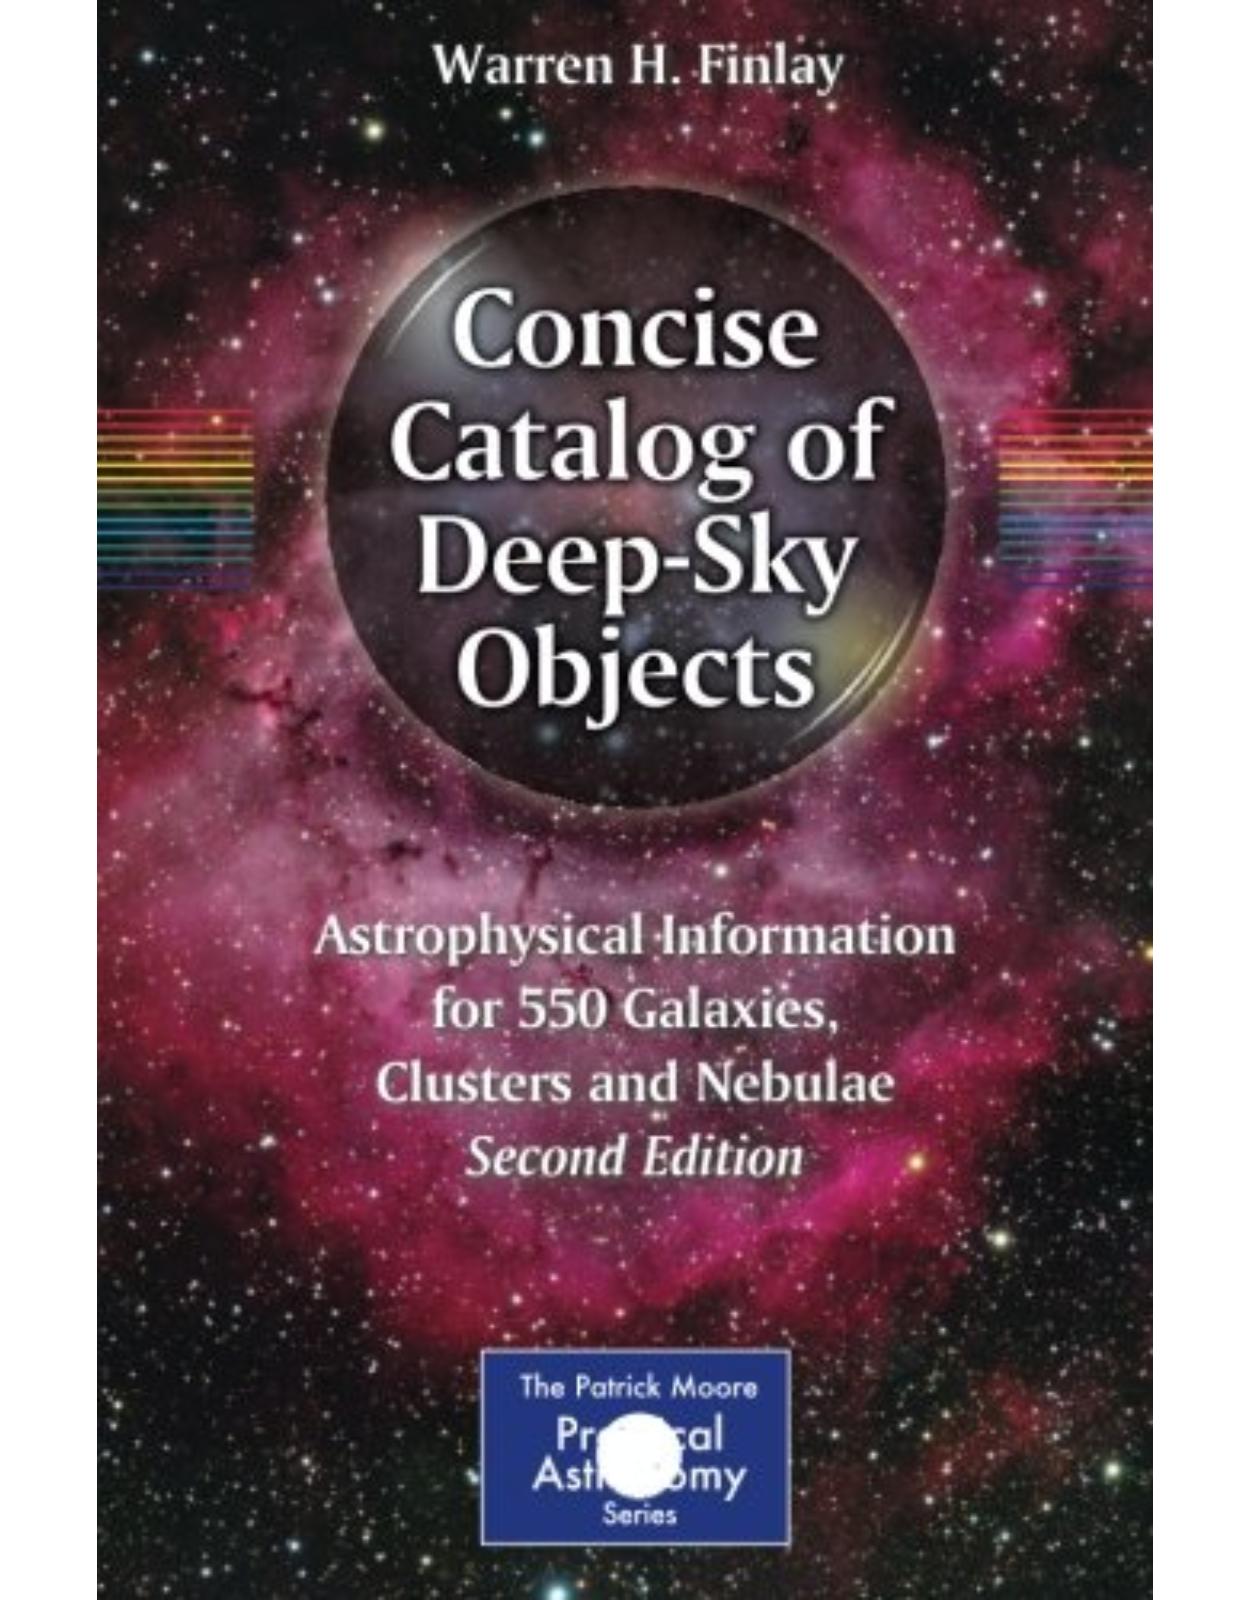 Concise Catalog of DeepSky Objects